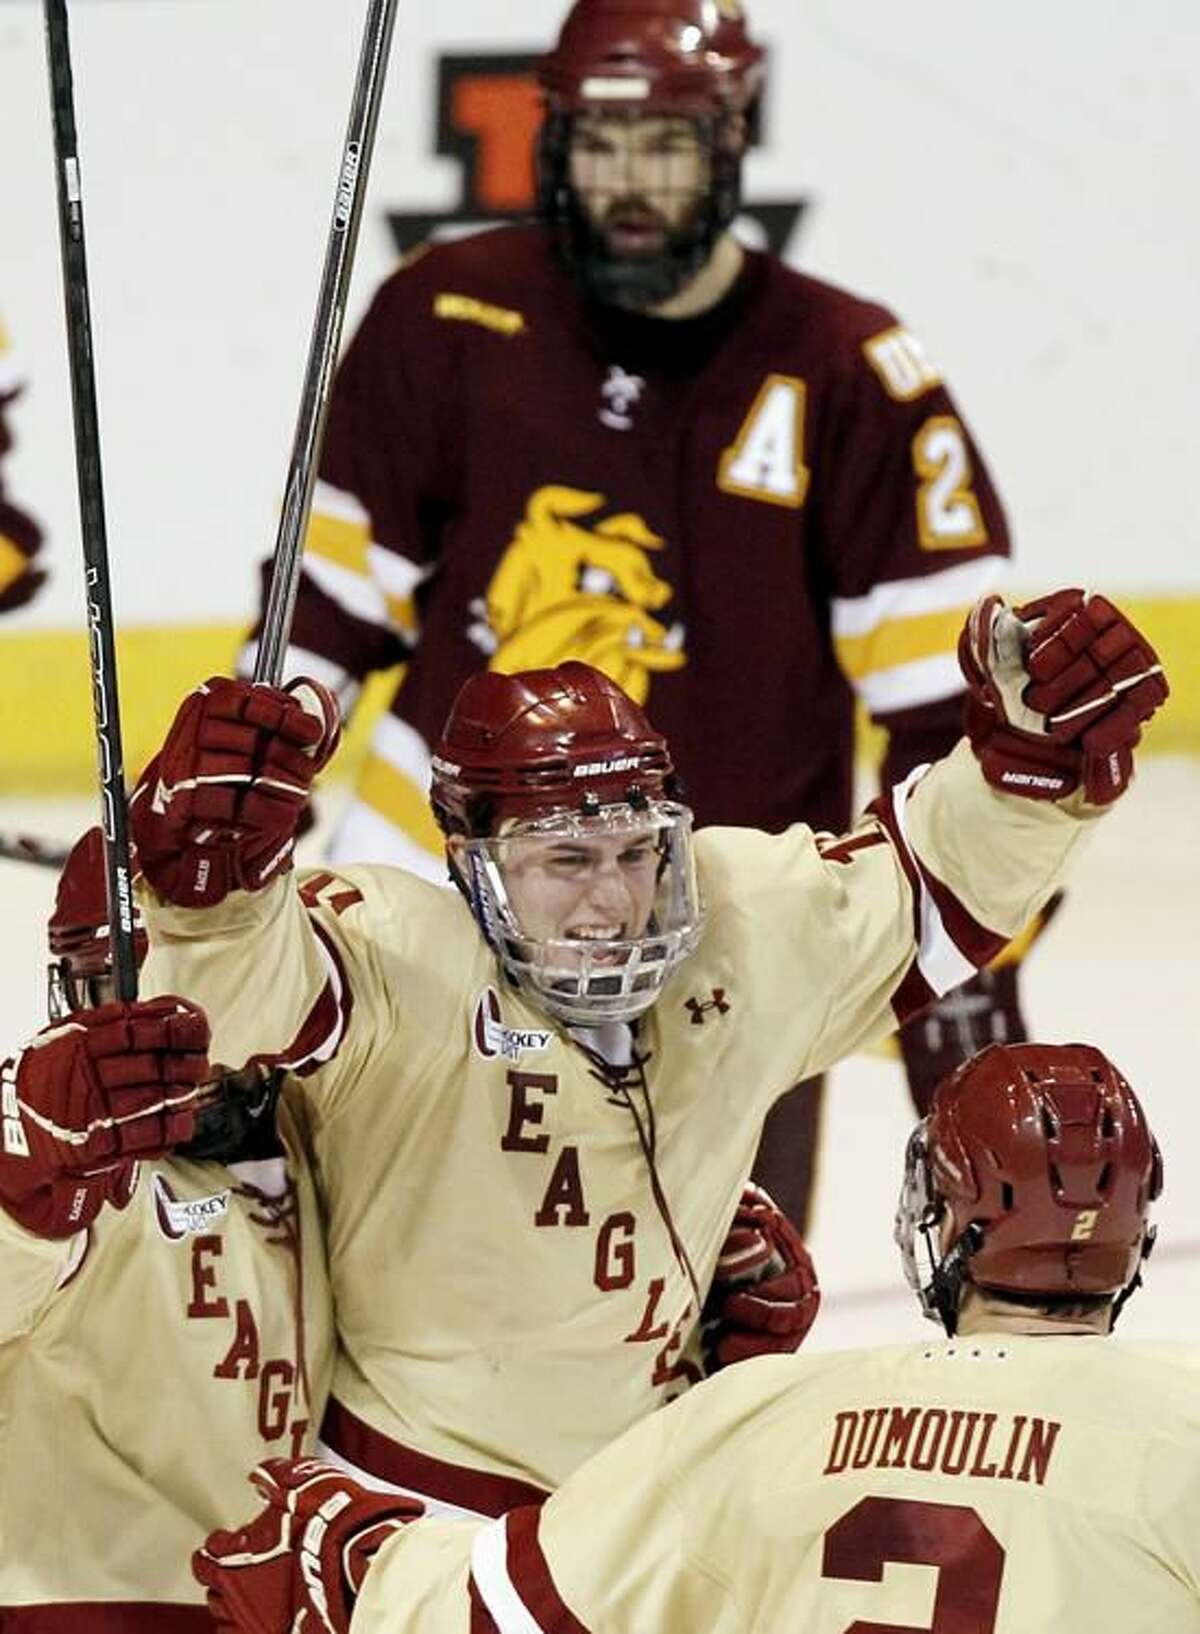 Boston College's Pat Mullane celebrates his goal as Minnesota-Duluth's Brady Lamb (2) looks on during the second period of an NCAA Northeast Regional Final college hockey game in Worcester, Mass., Sunday, March 25, 2012. (AP Photo/Winslow Townson)